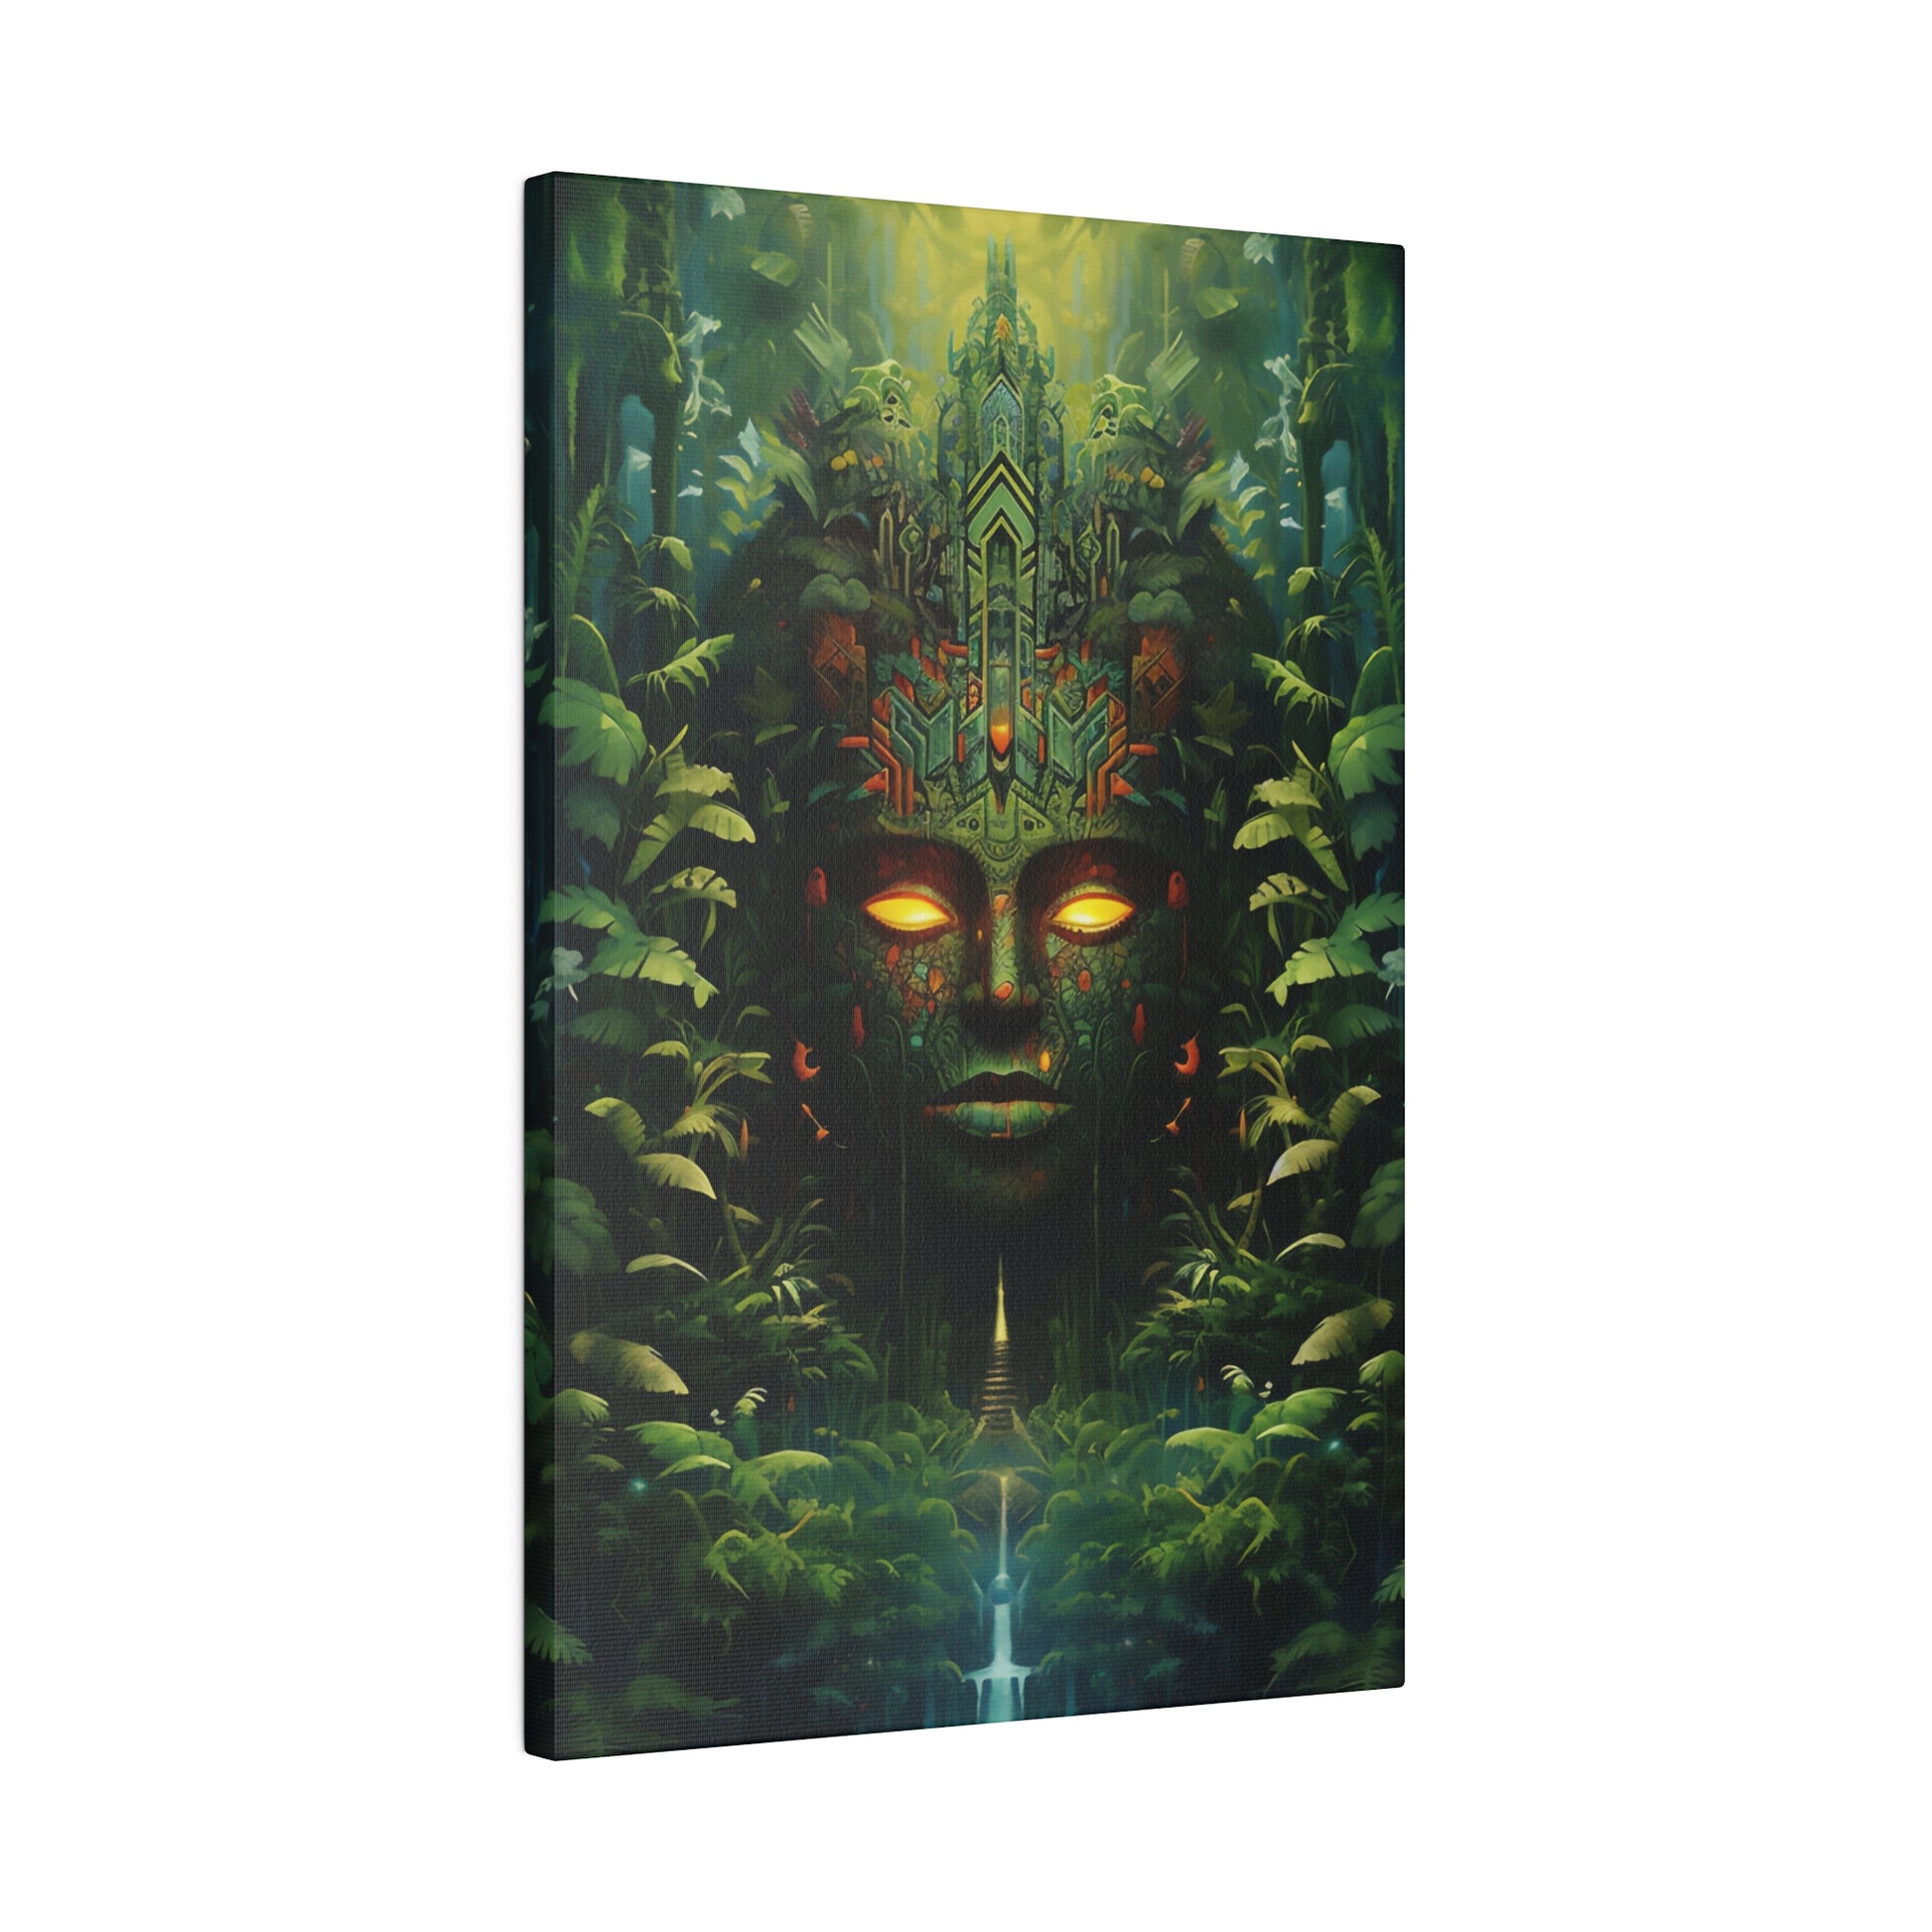 Ayahuasca-Inspired Psychedelic Art Nature Nymph Portrait - Vibrant Stretched Canvas Print